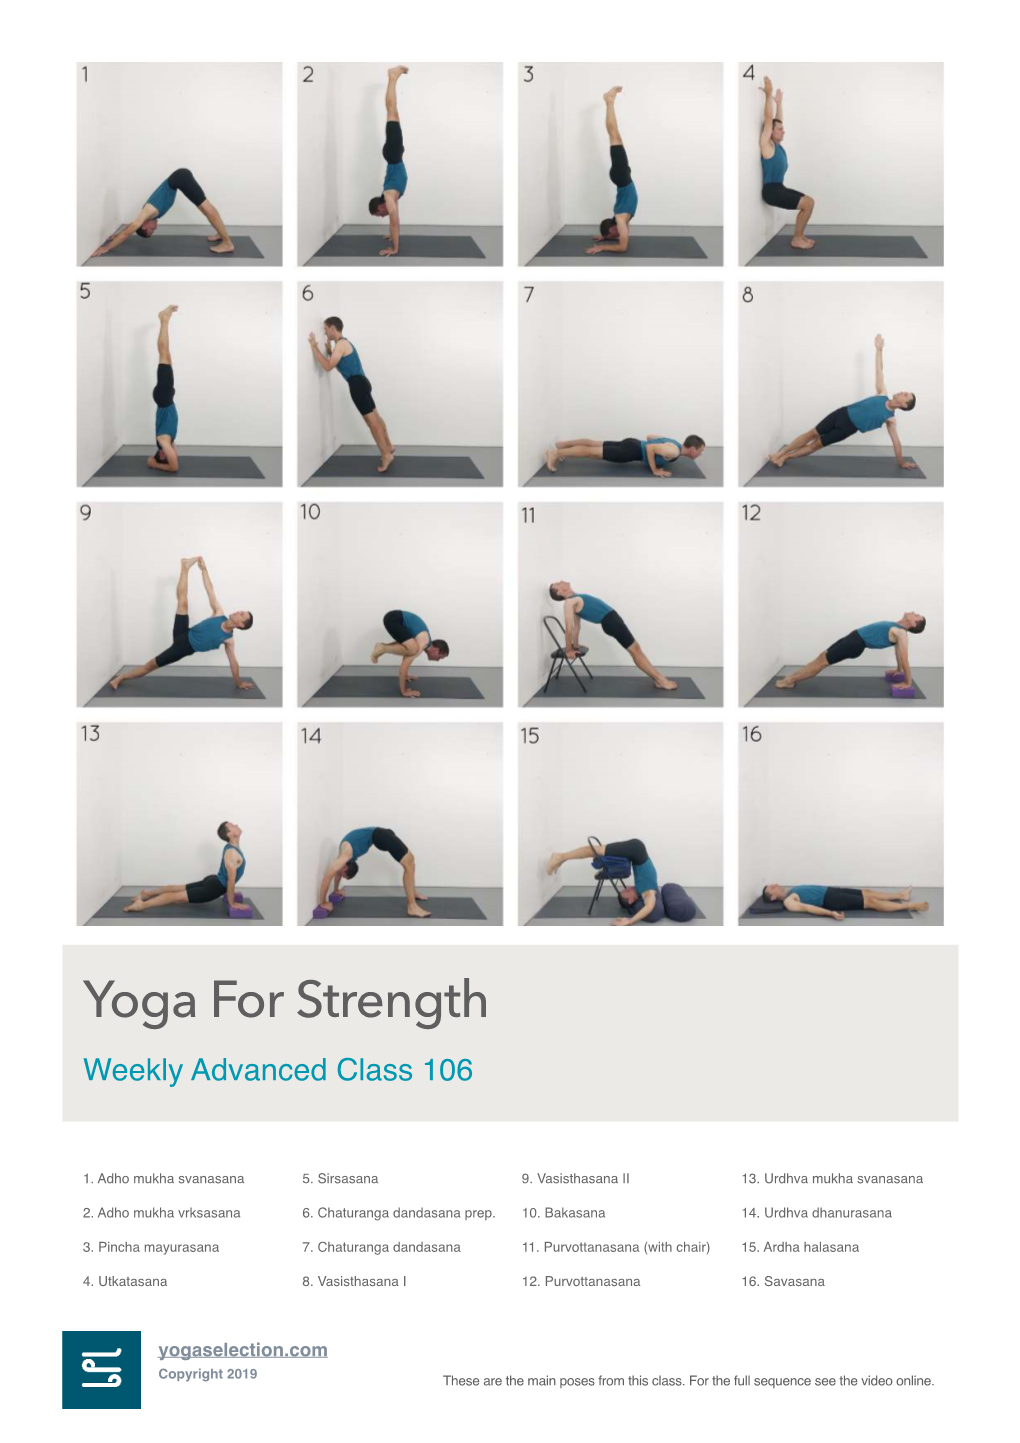 Weekly Advanced Class 106 Yoga for Strength